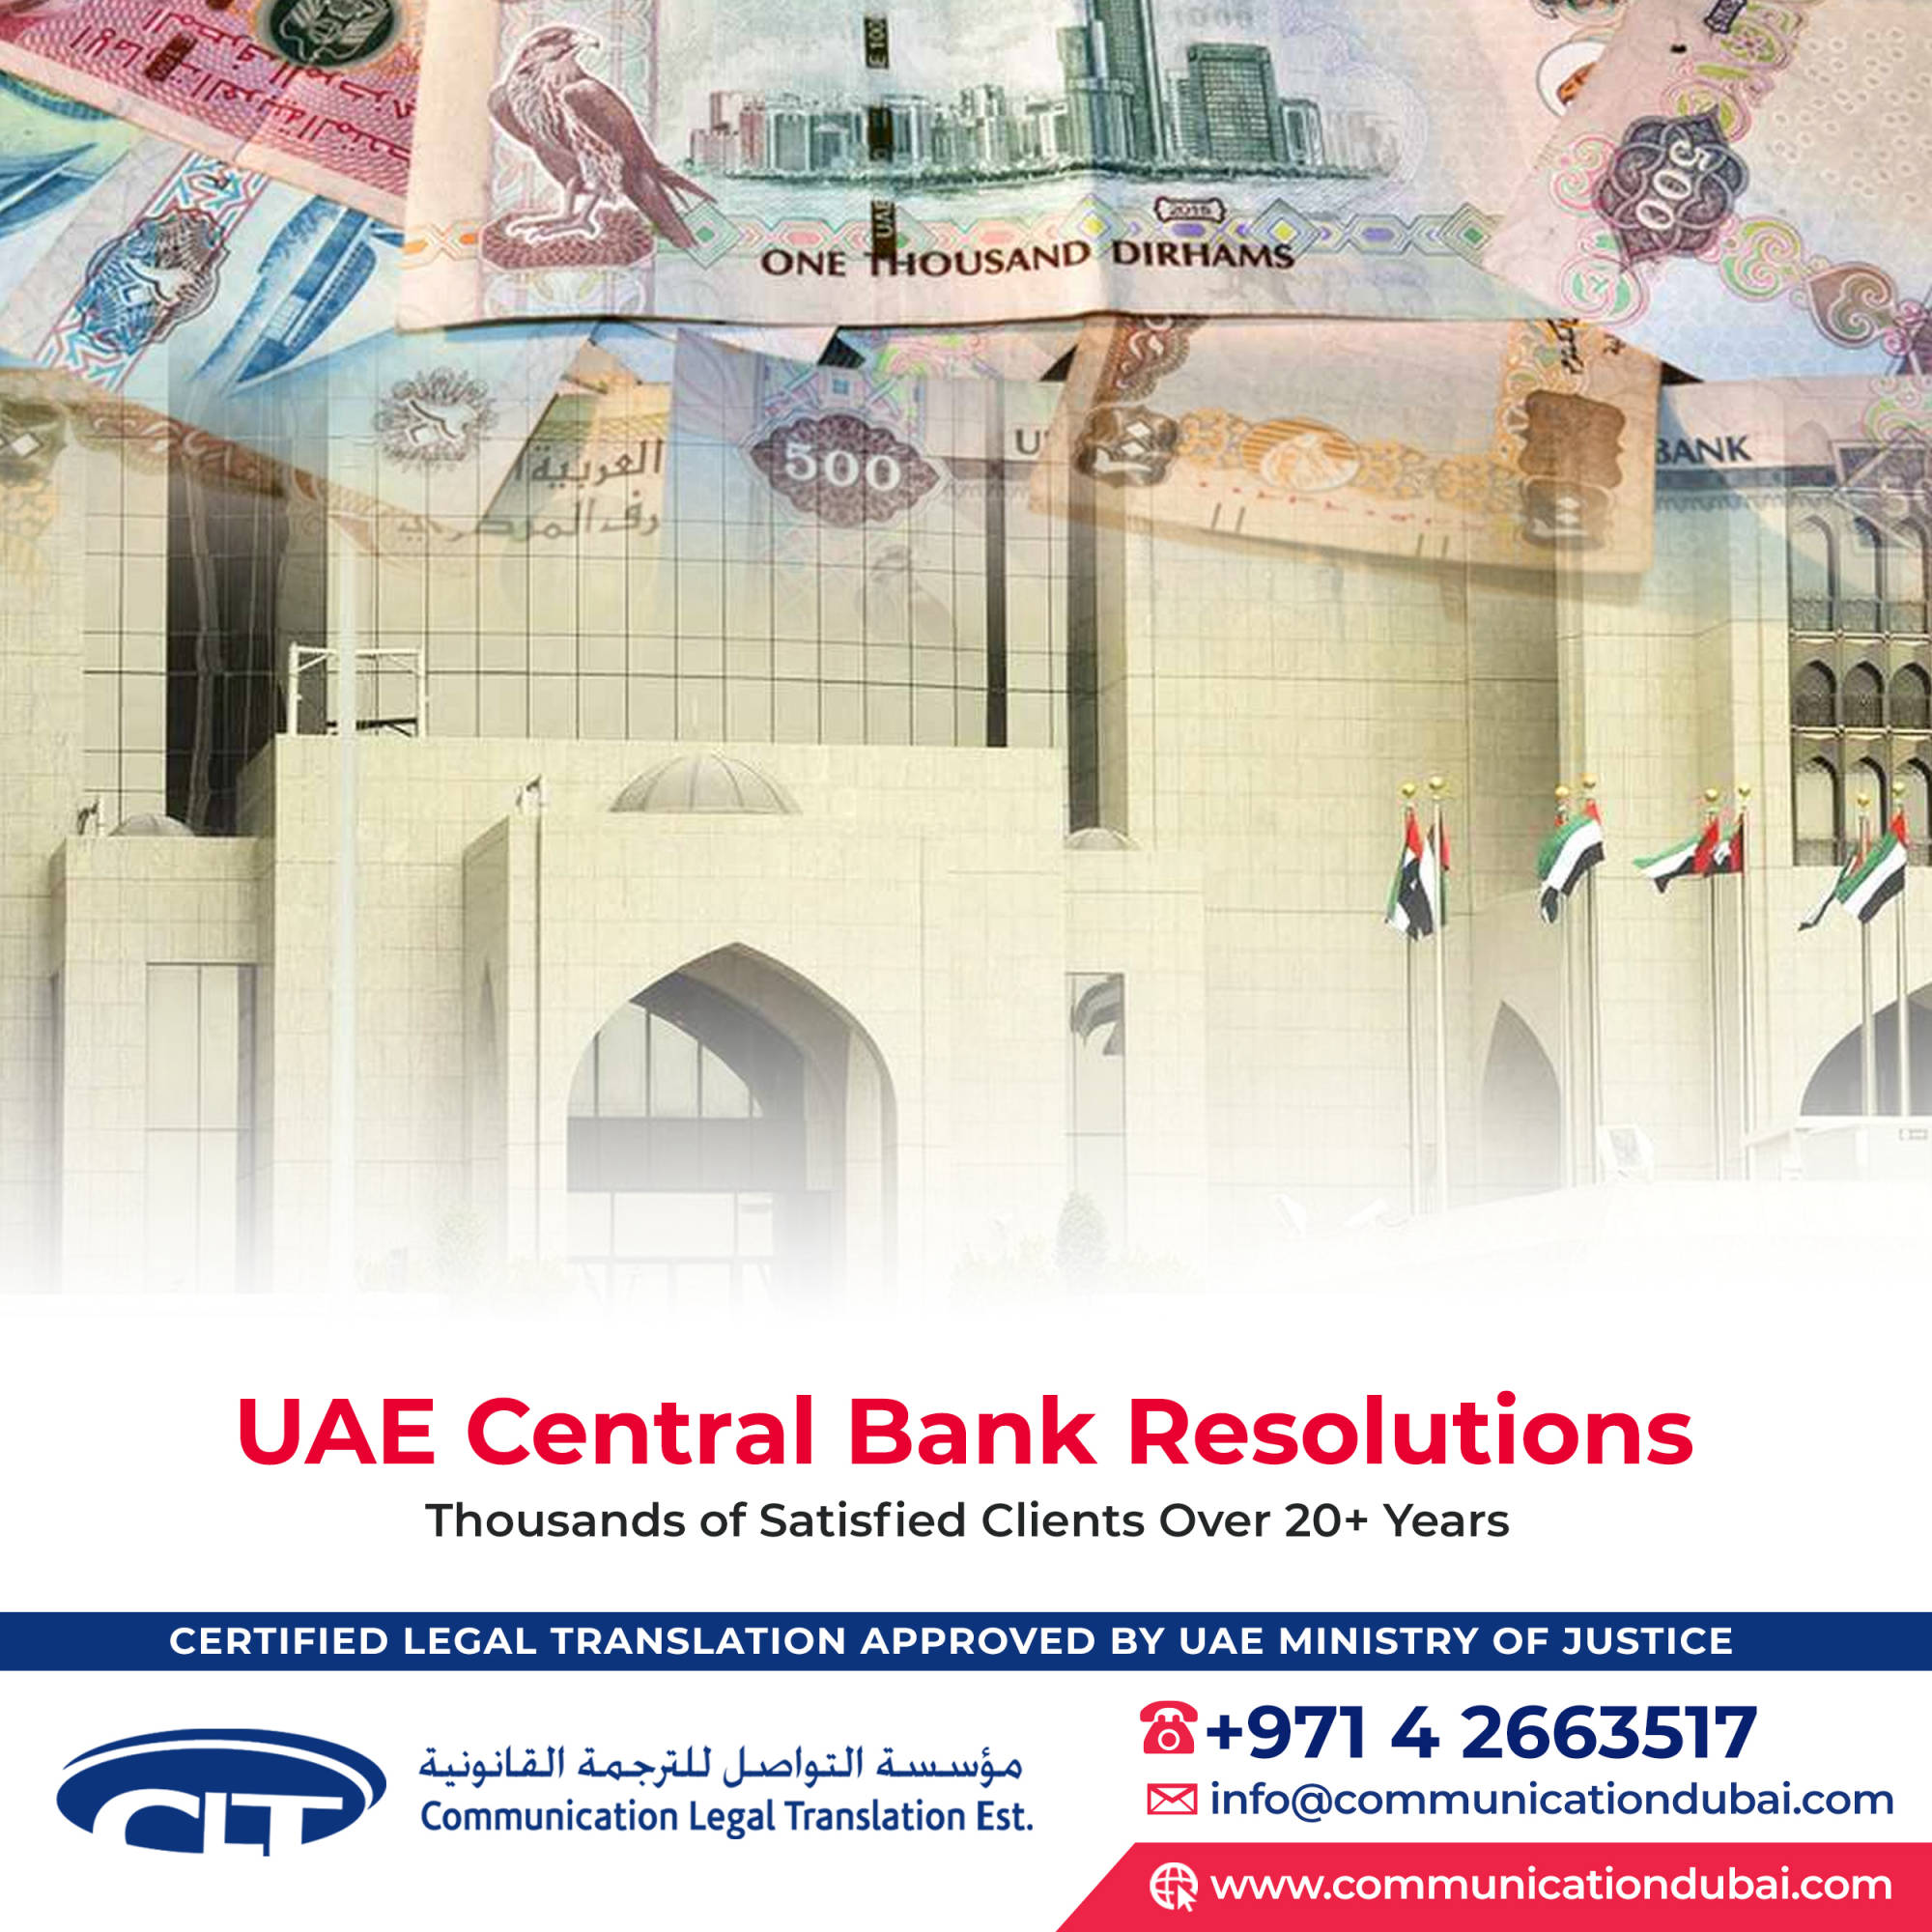 United Arab Emirates, Resolution of the Chairman of the Board of Directors of the United Arab Emirates Central Bank No. (03)  of  2020  